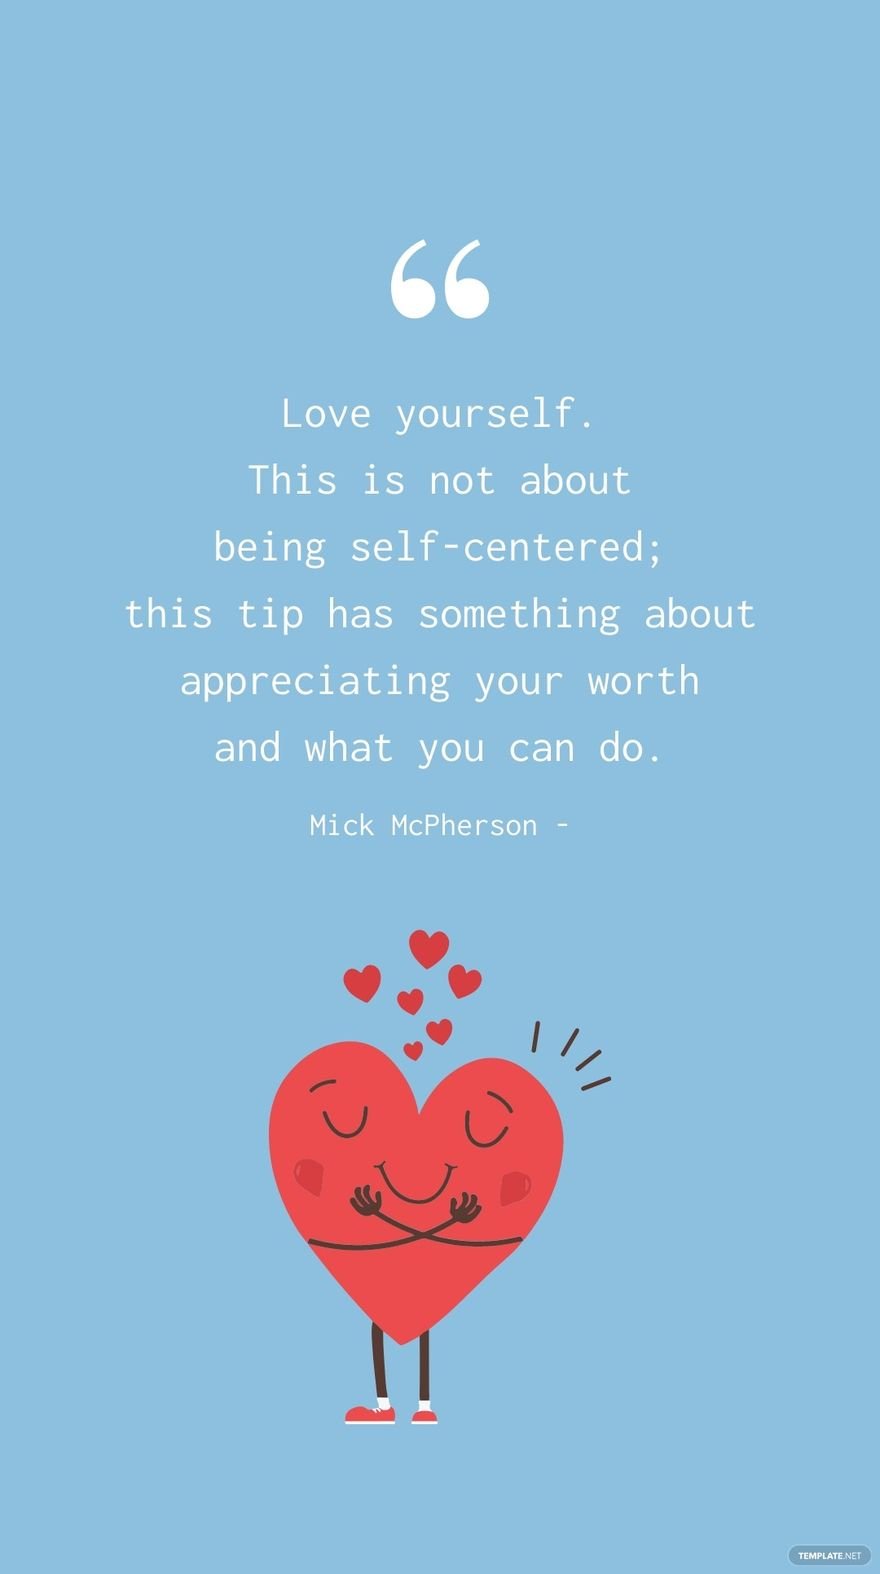 Free Mick McPherson - Love yourself. This is not about being self-centered; this tip has something about appreciating your worth and what you can do. in JPG